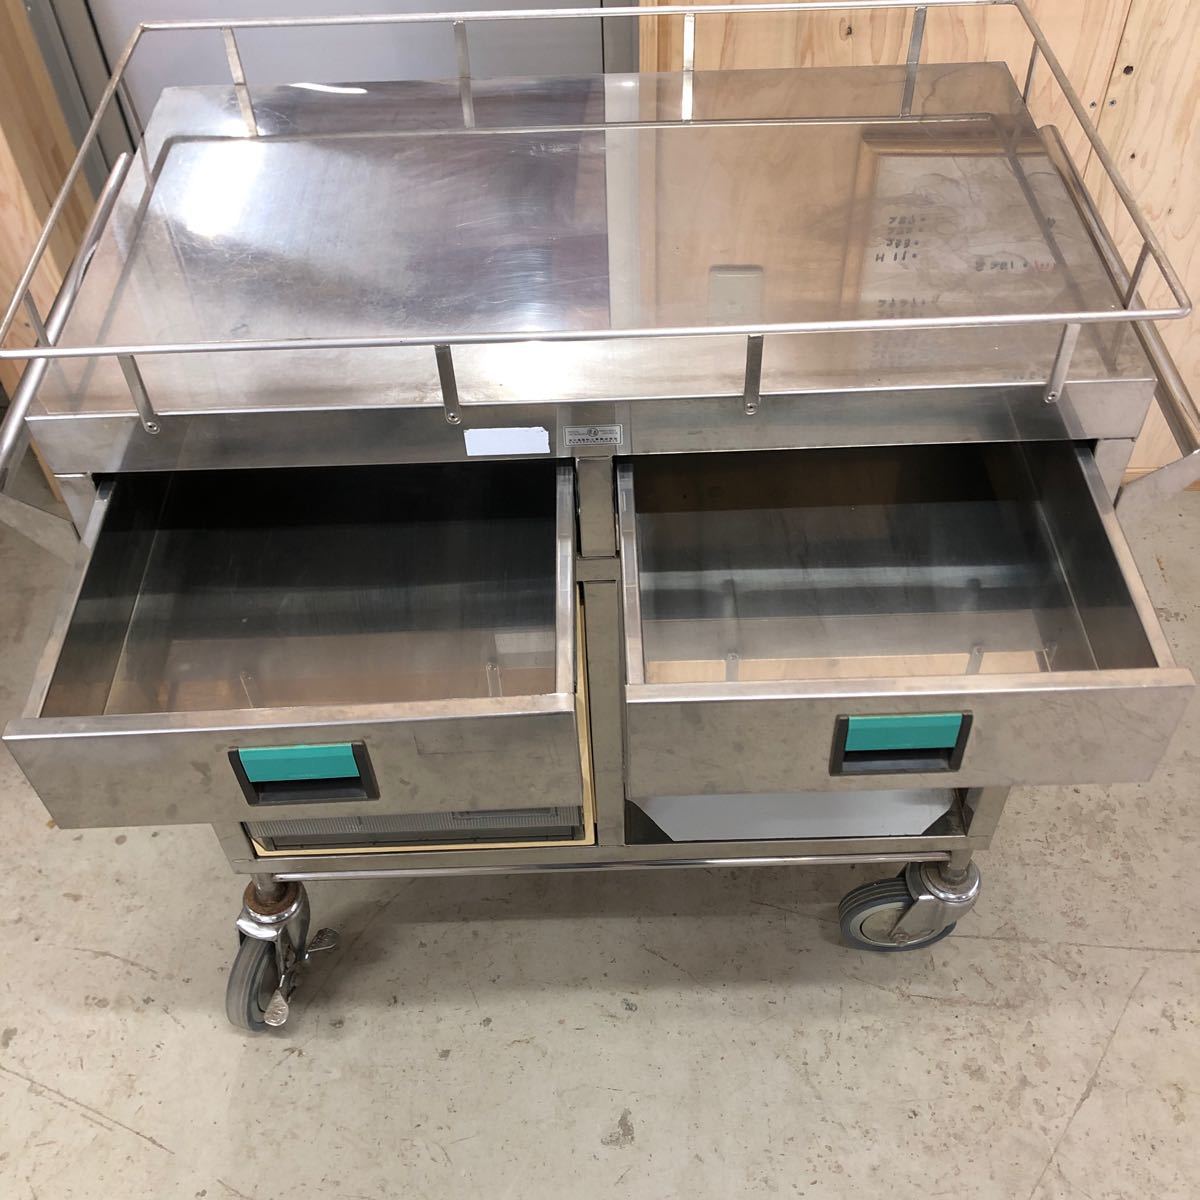 861 original stainless steel with casters Wagon rack / times ... hospital medical care kitchen store furniture movement work industry garage 